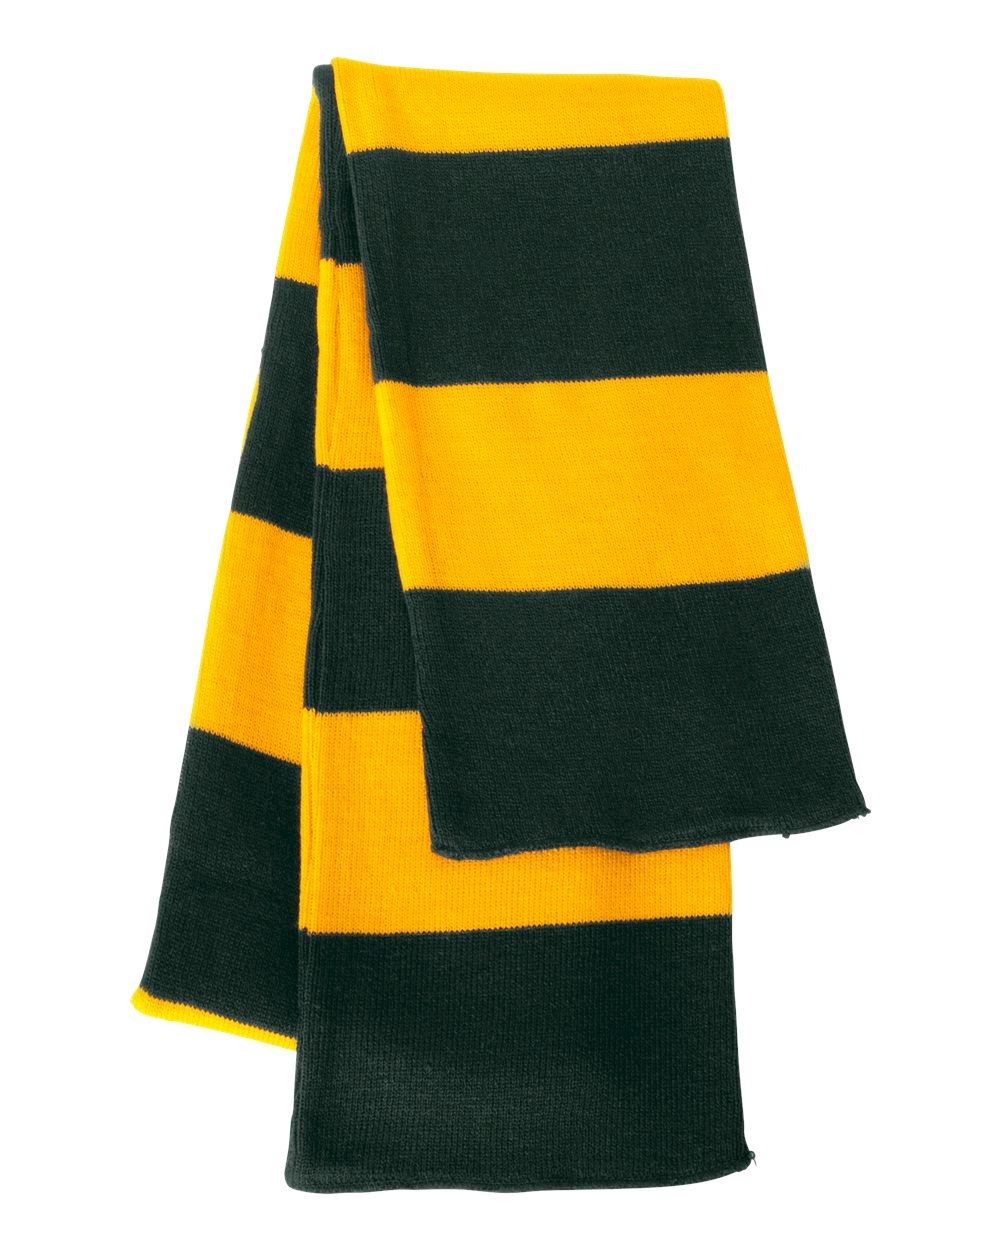 Rugby Striped Knit Scarf Embroidery Blanks - FOREST/GOLD